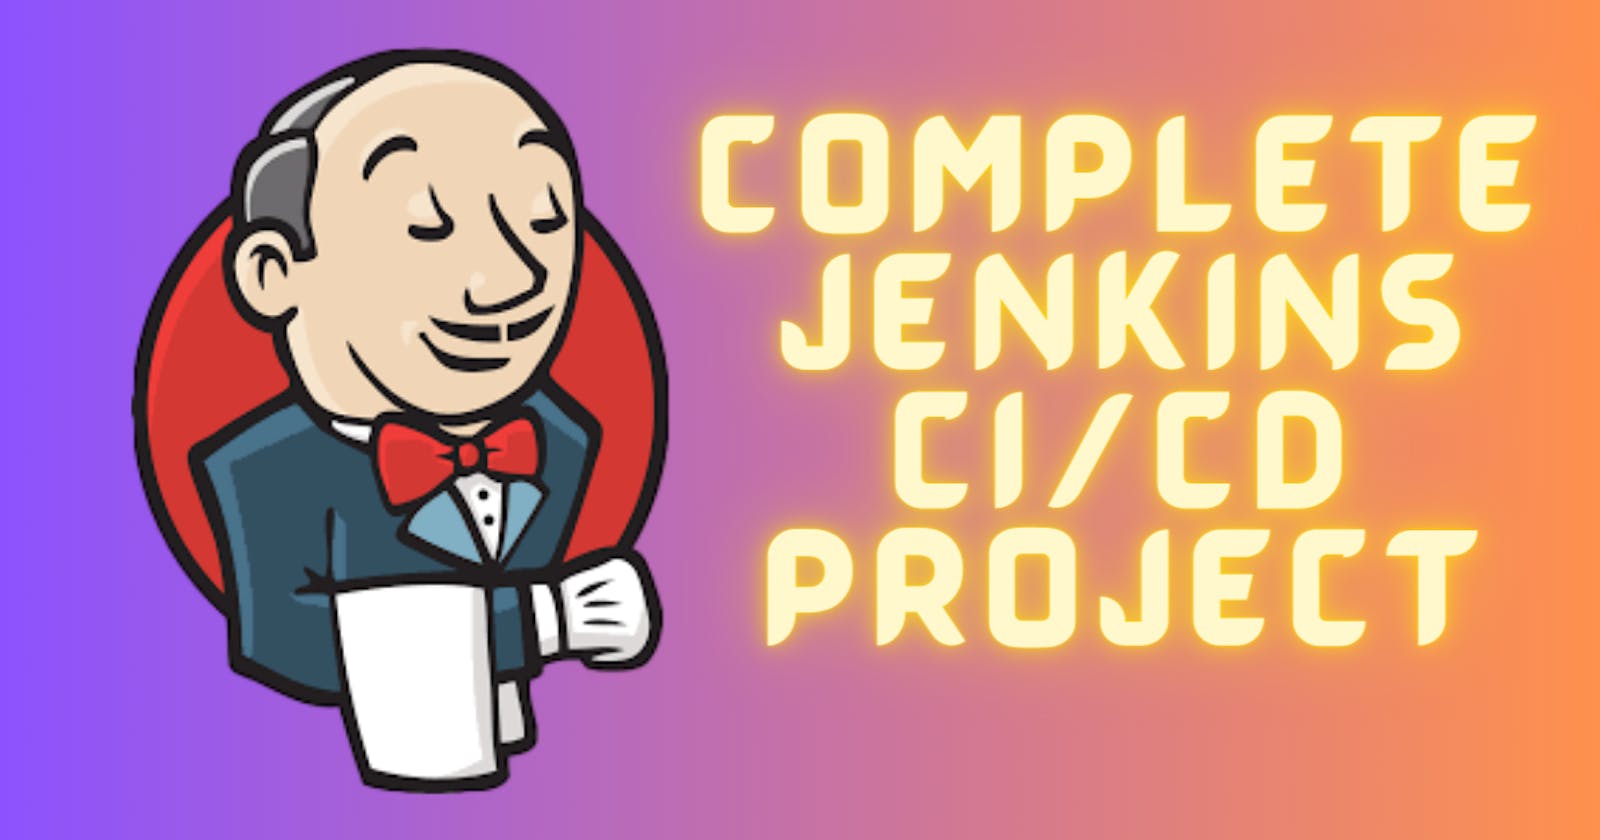 Day 24 - Complete CI/CD Jenkins Project